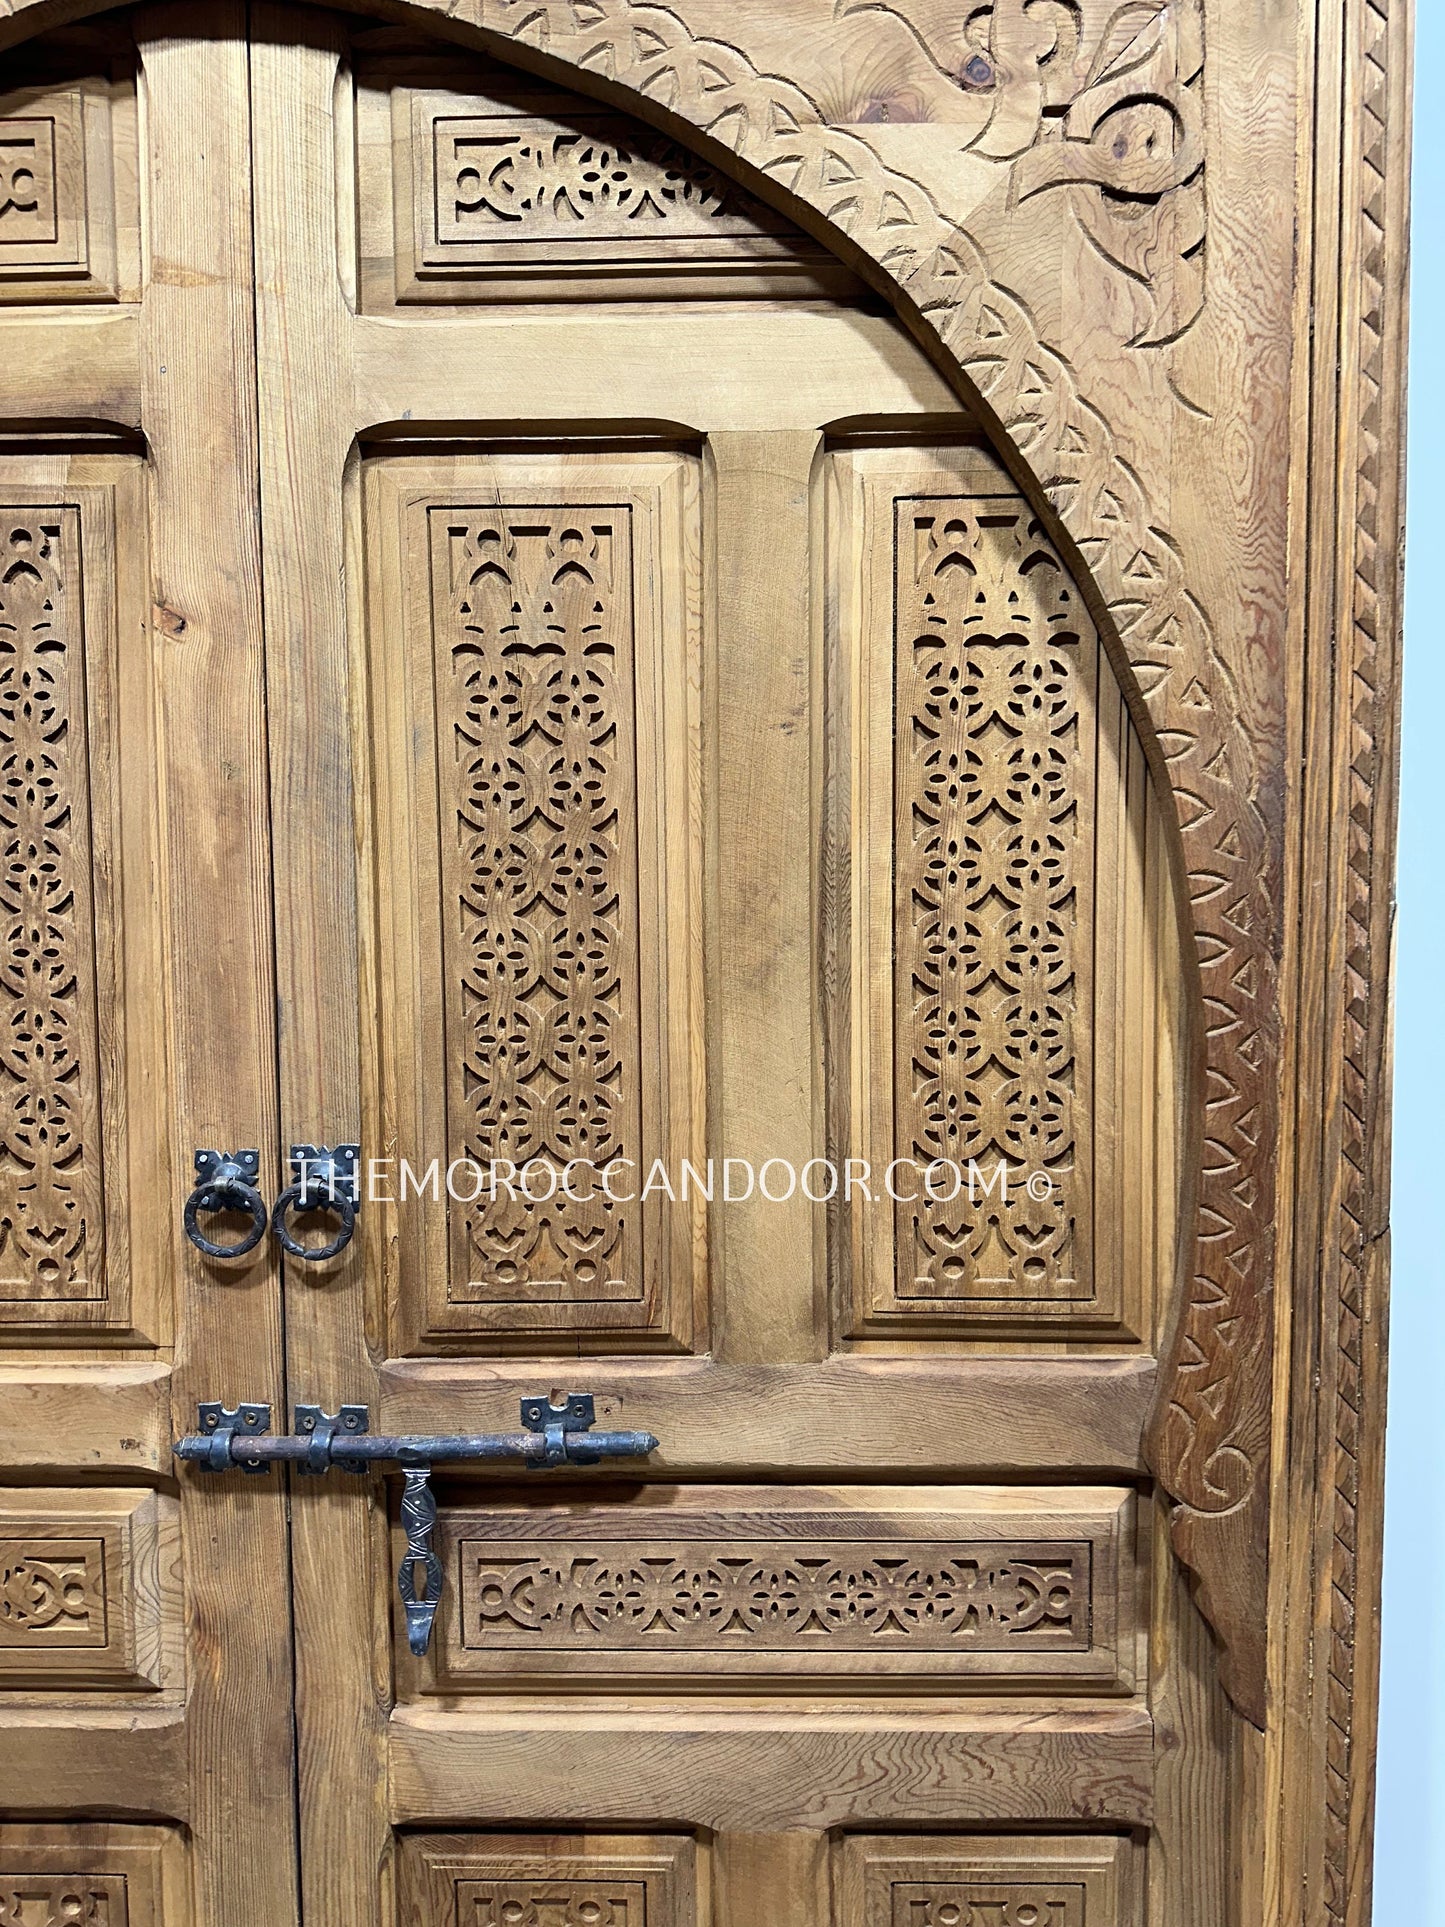 Exquisite Hand-carved Moroccan Door - Geometric Design - Authentic Riad Style - Authentic Moroccan Riad Door - Hand-carved Geometric Door